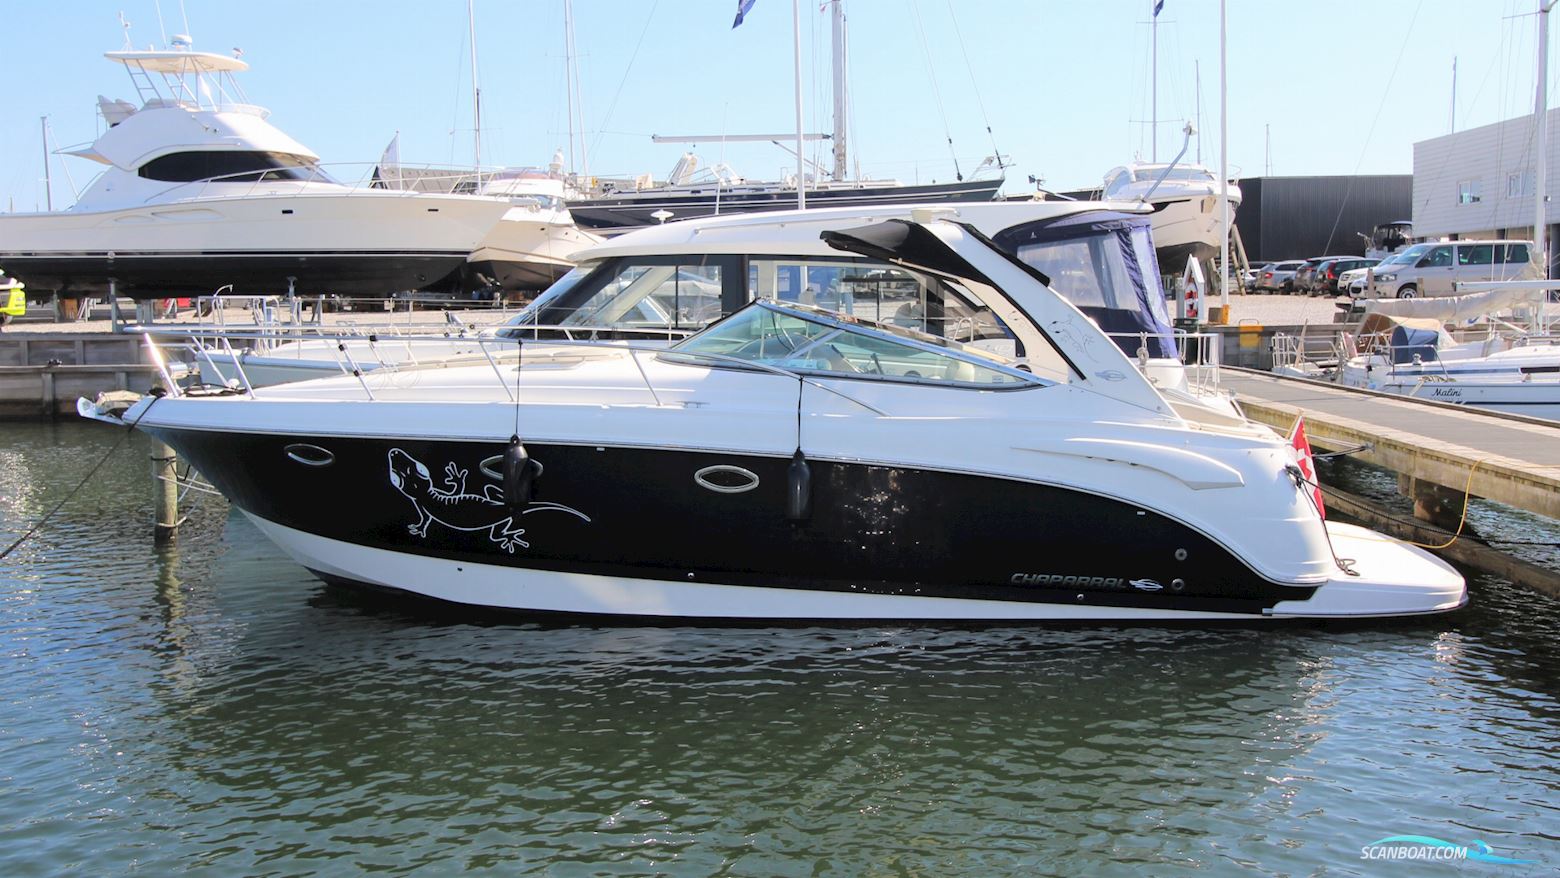 Chaparral 330 Signature Motor boat 2007, with Volvo Penta engine, Denmark